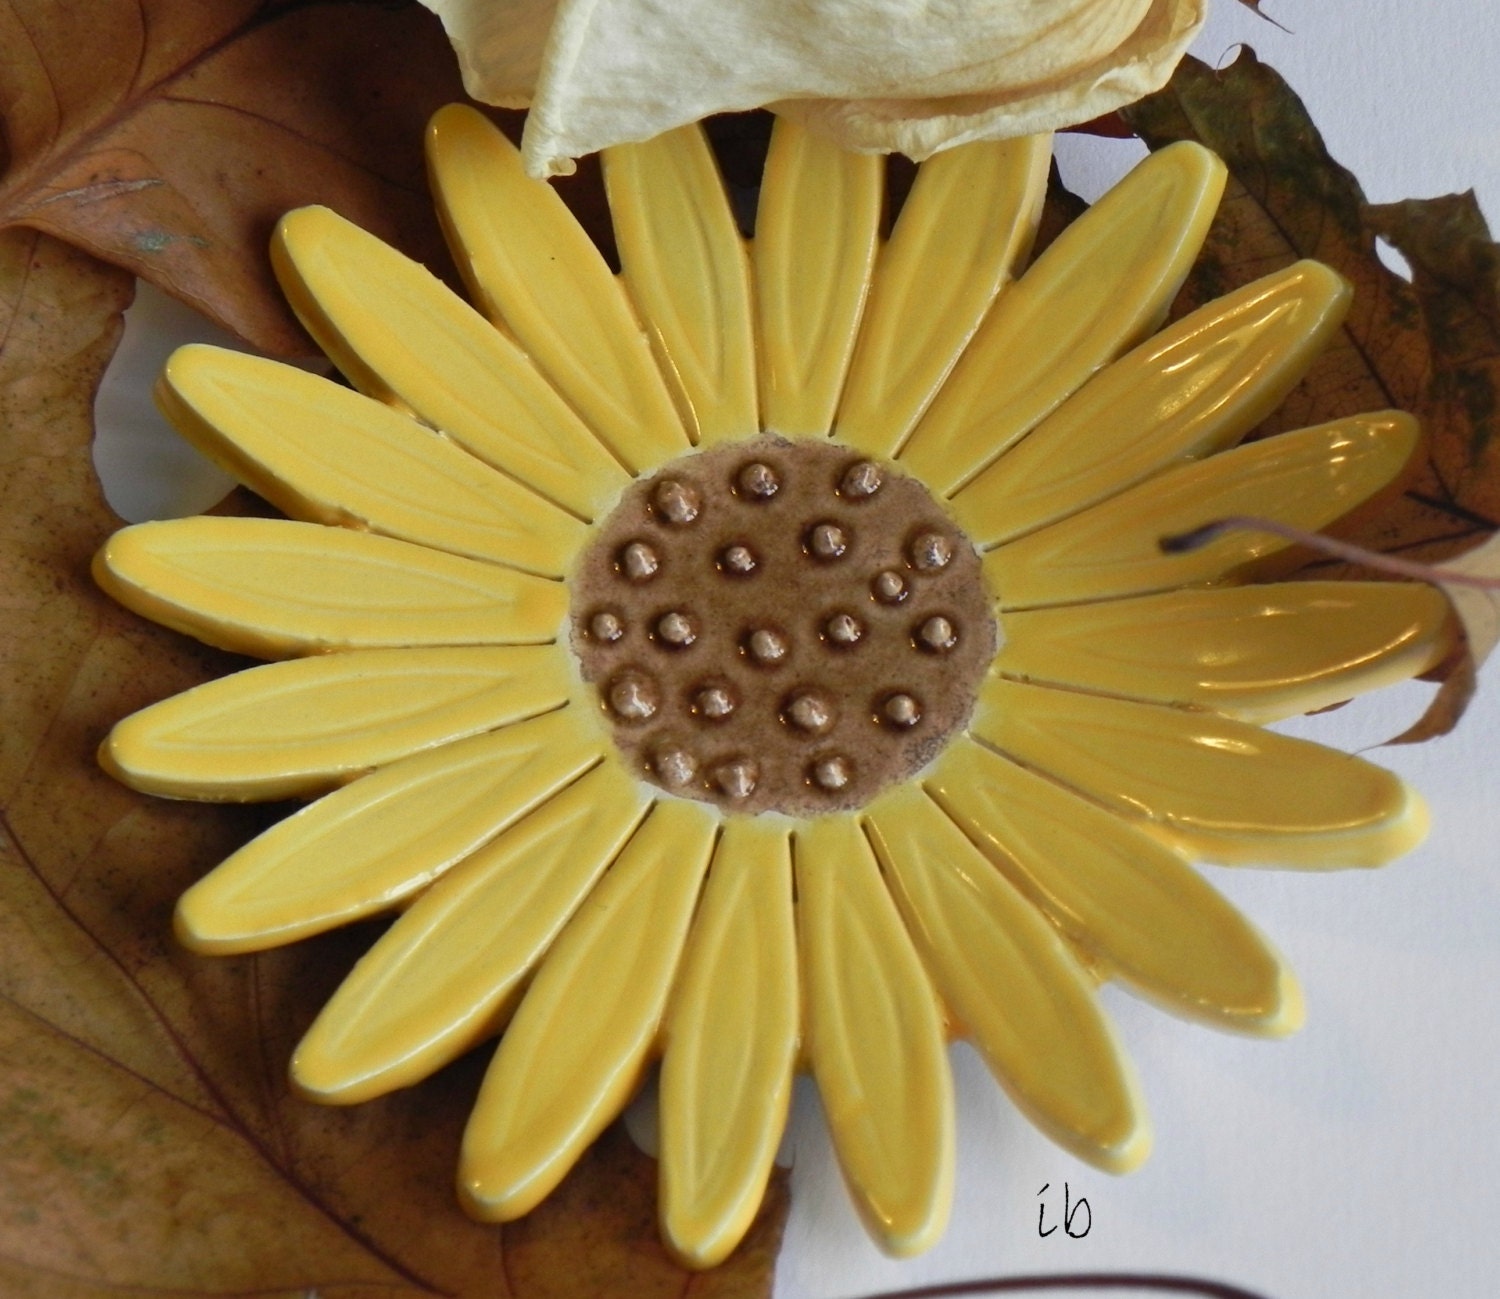 Sunflower Ceramic Dish Pottery Jewelry Plate Summer Home Decoration Yellow with Brown Dots - Ceraminic